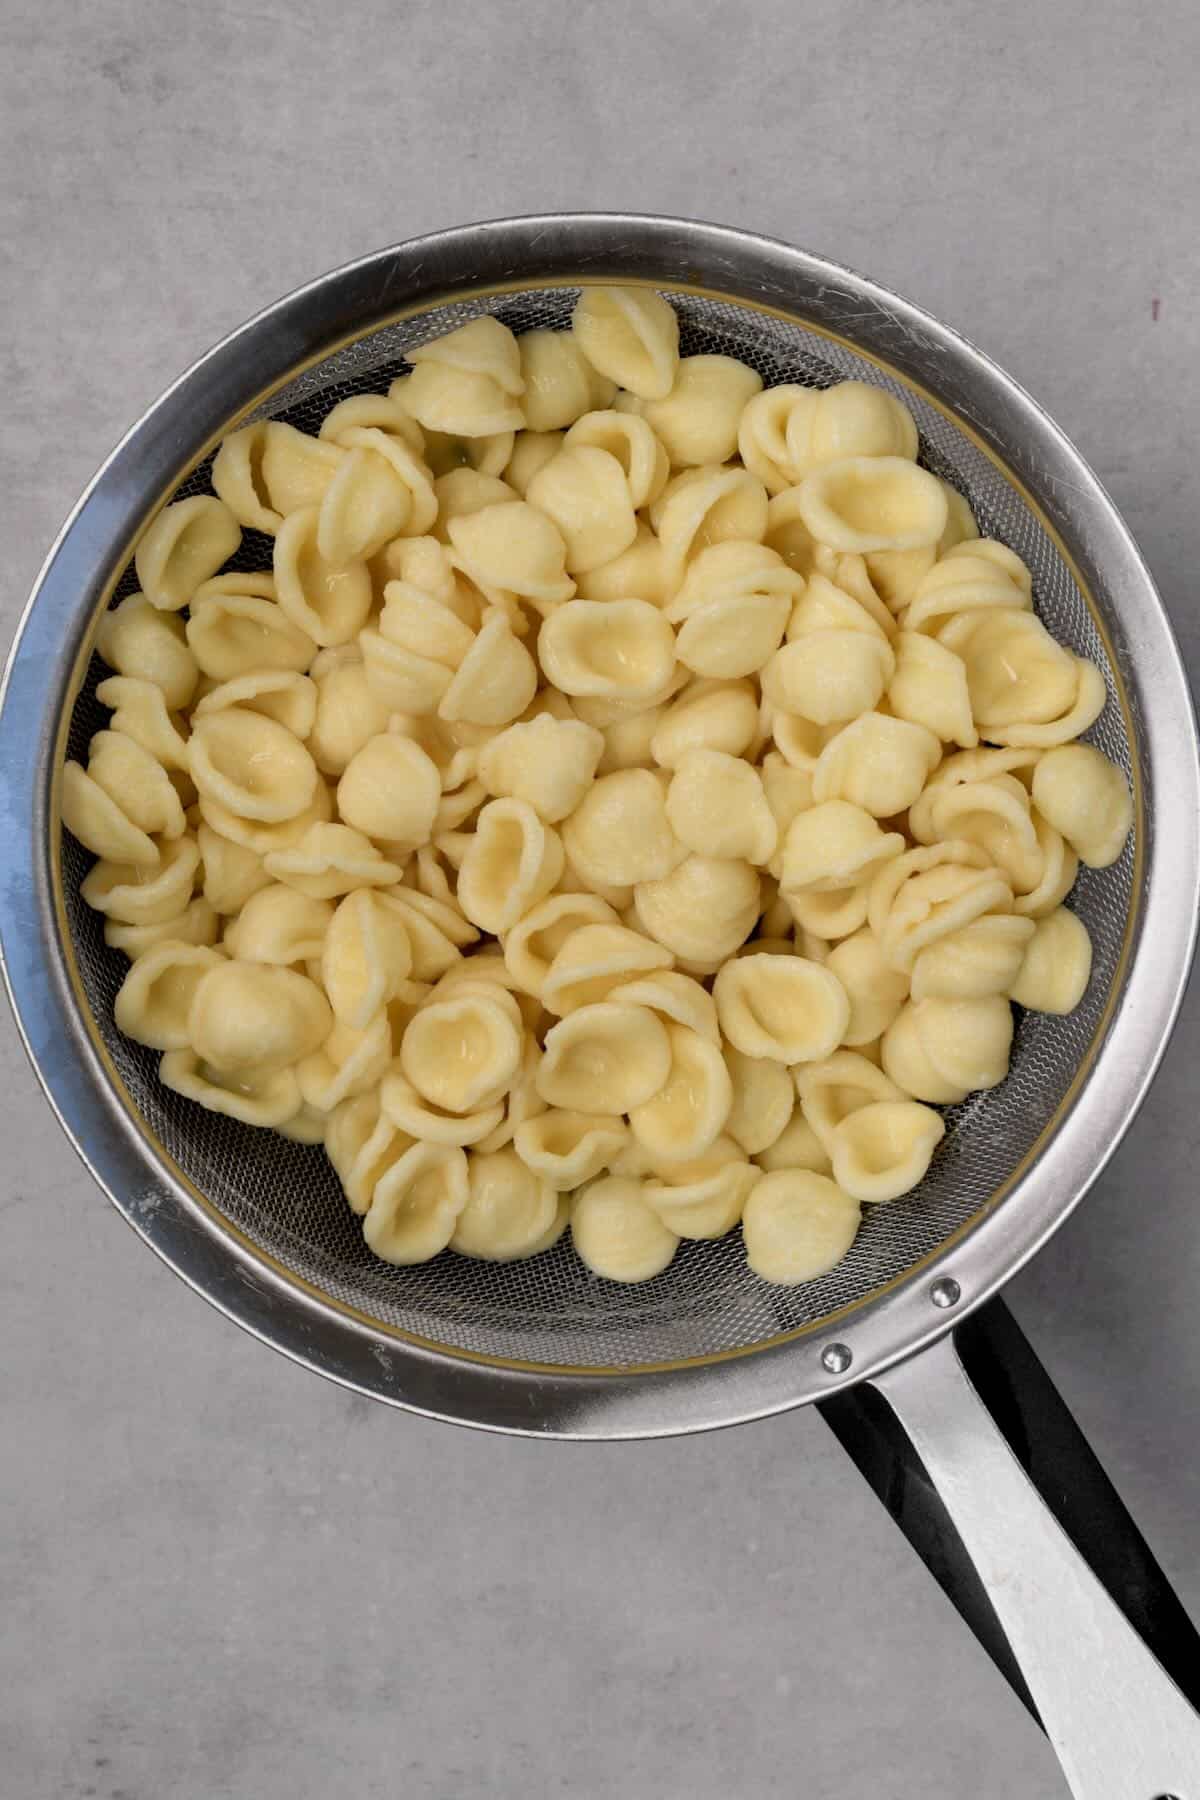 Cooked pasta shells